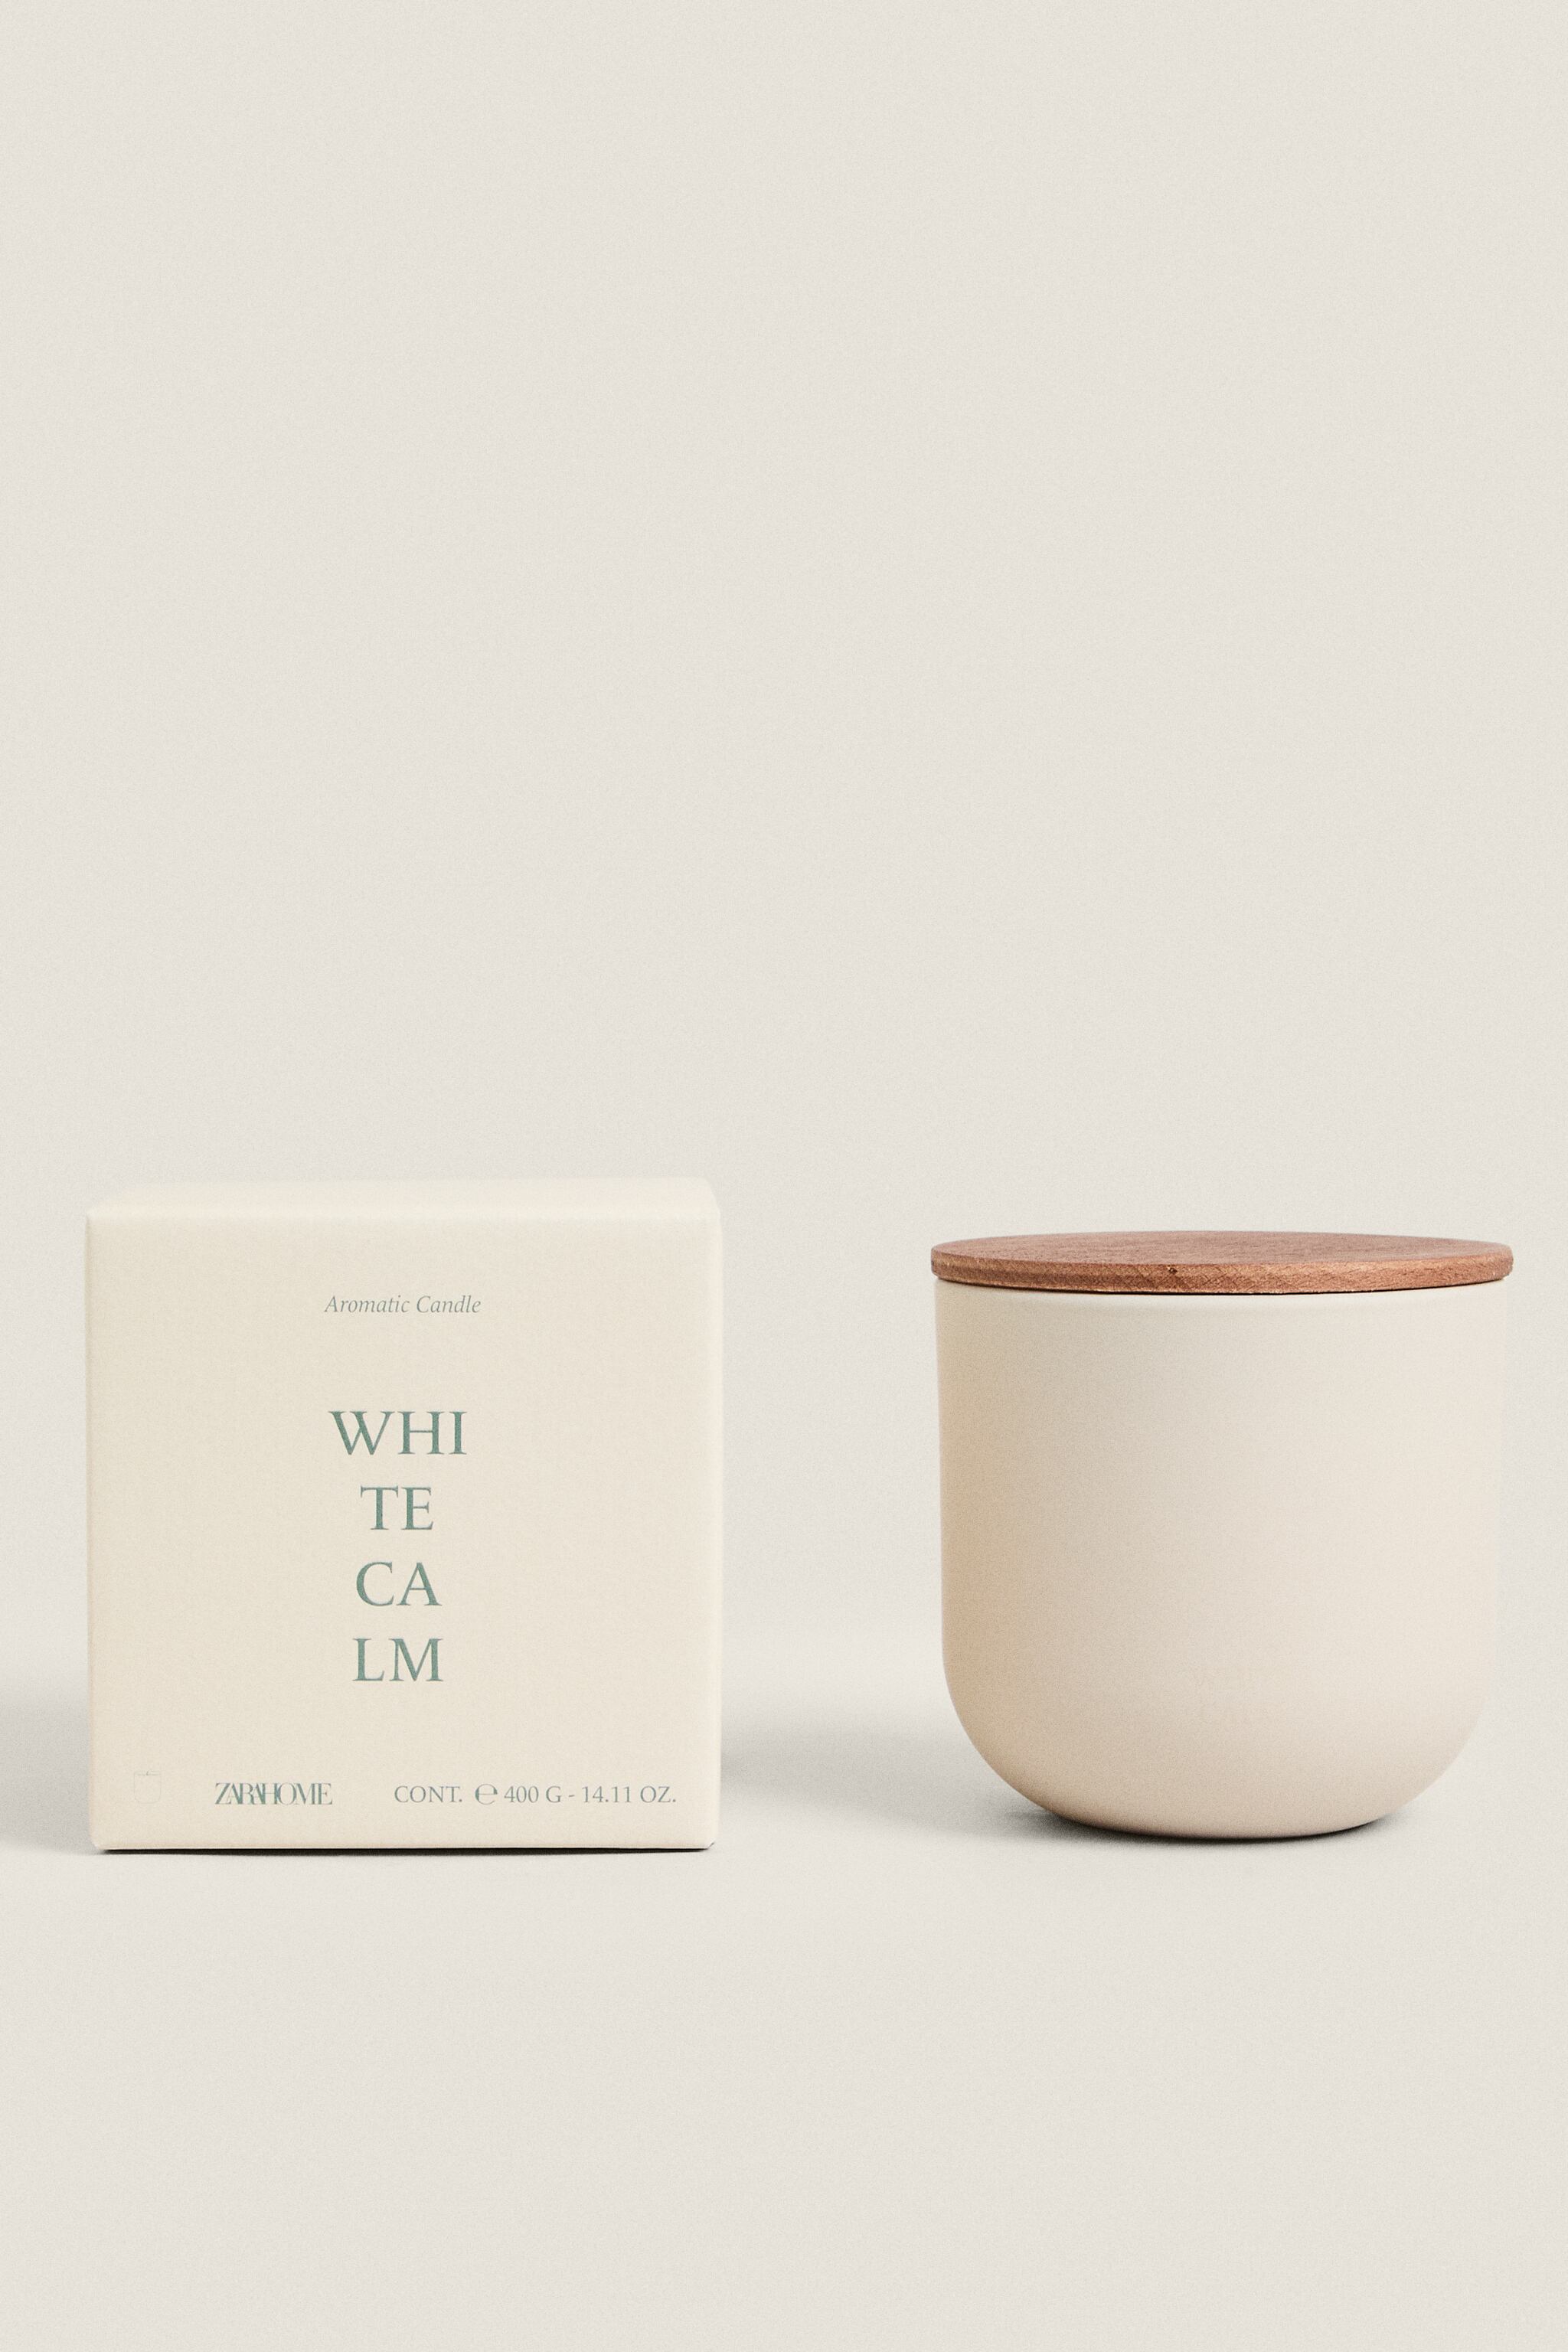 (400 G) WHITE CALM SCENTED CANDLE